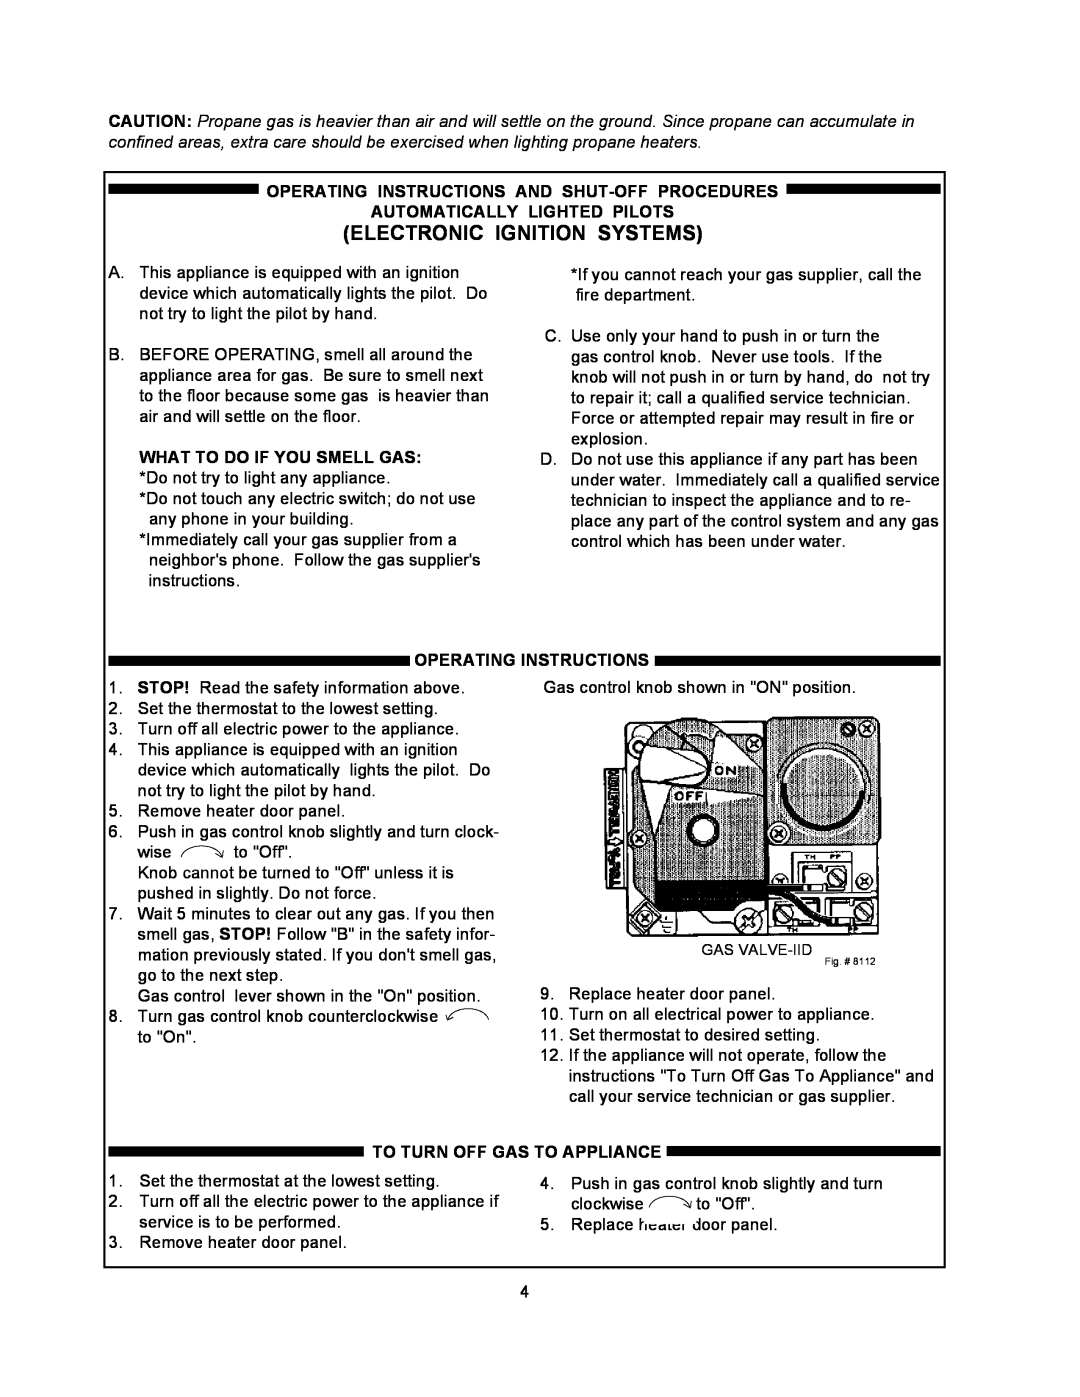 Raypak 055B installation instructions Electronic Ignition Systems, Gas Valve-Iid 